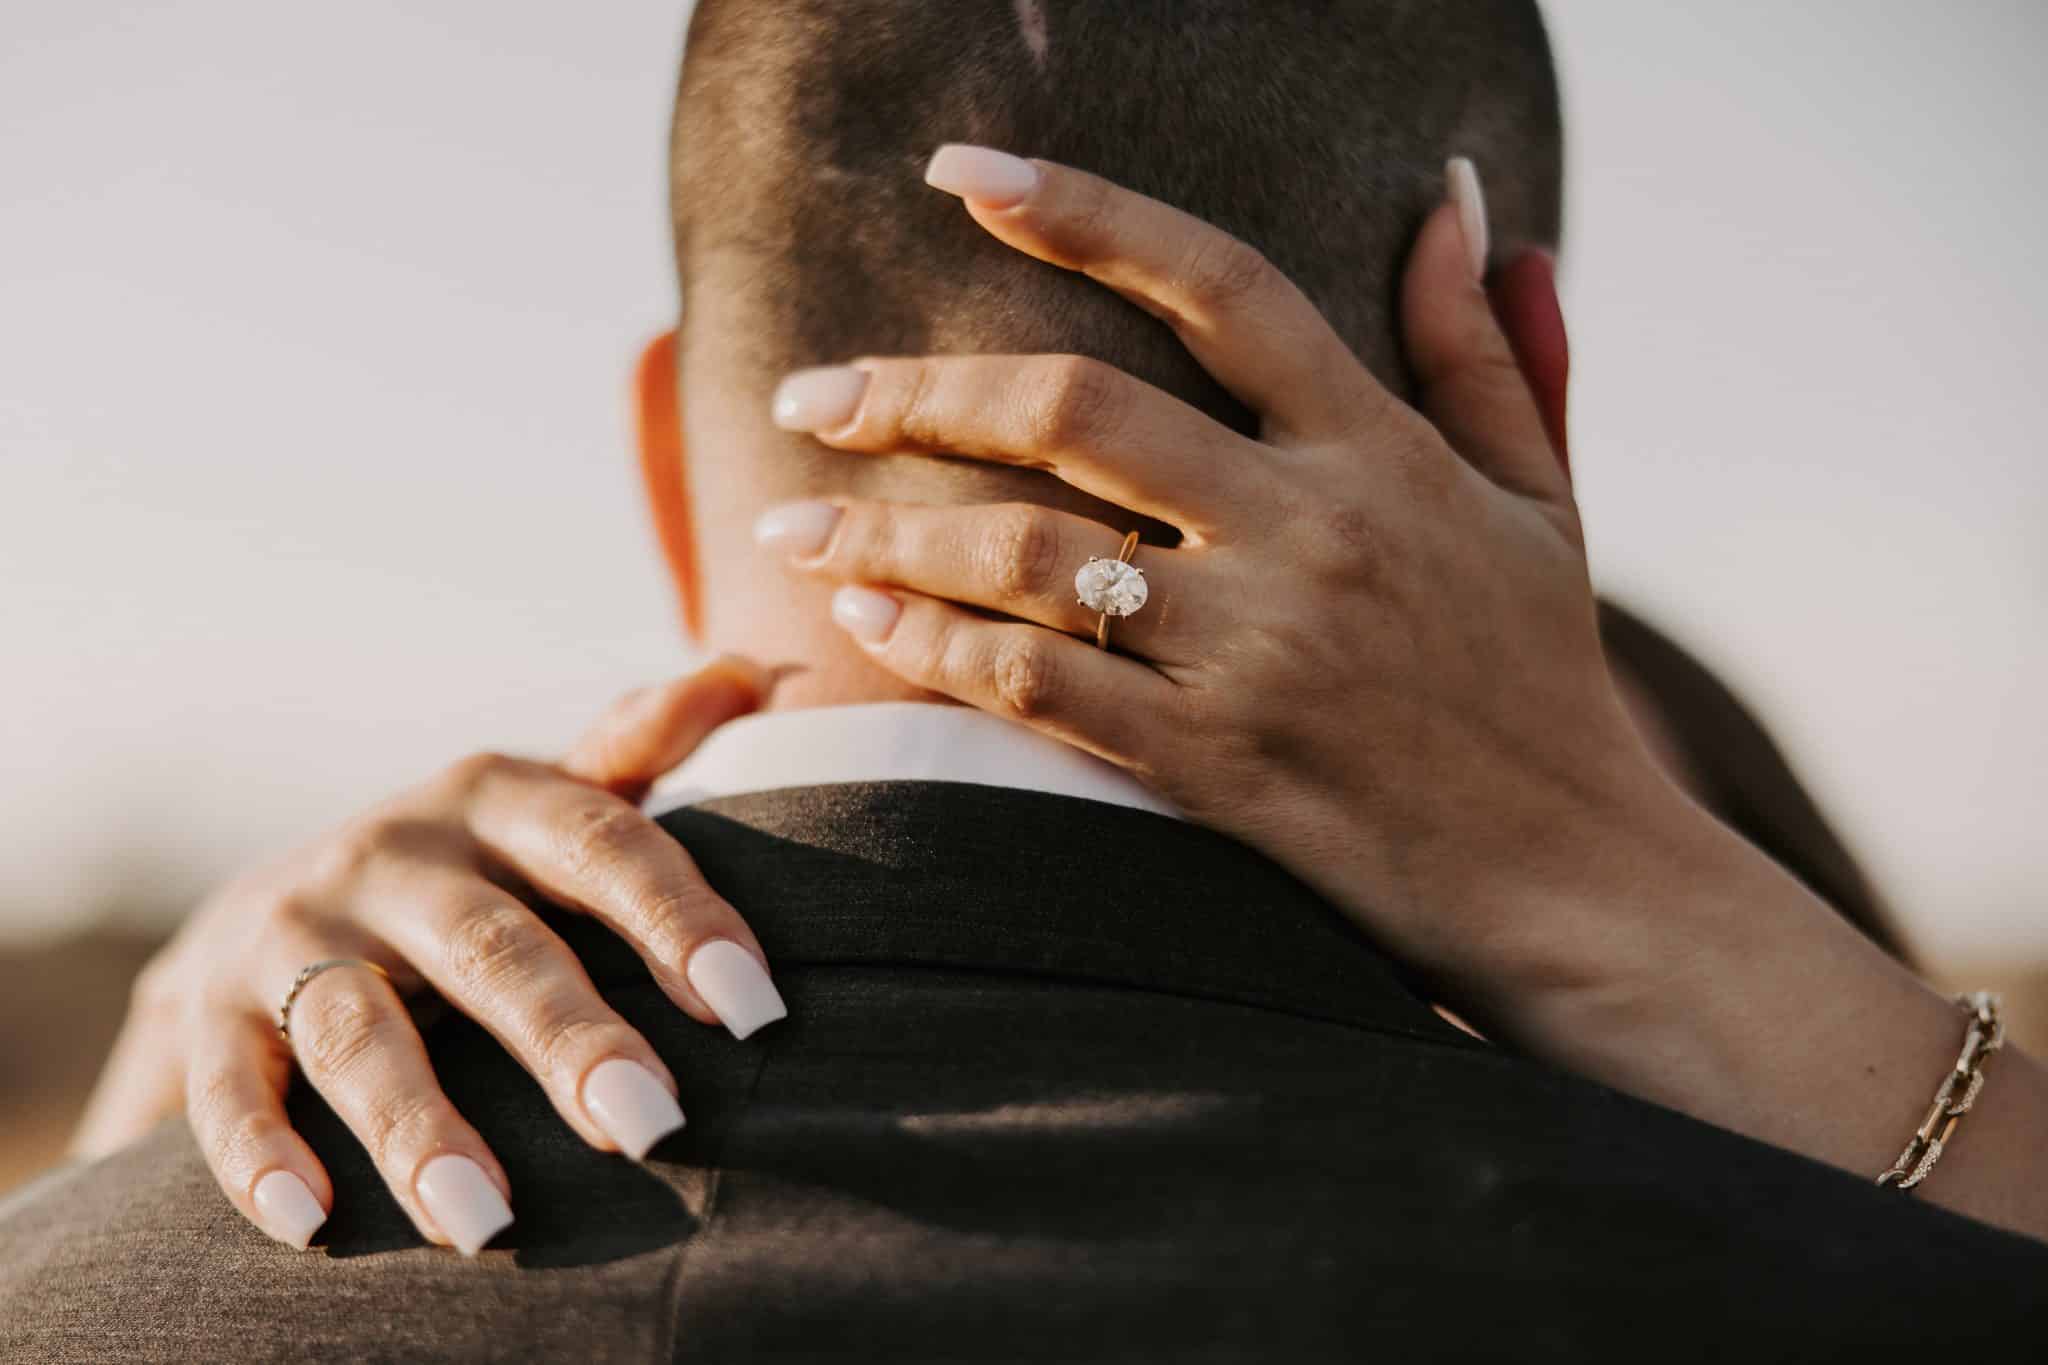 Nicolle wraps her hands around Christian's neck showing her engagement ring, a gold band with a single large oval diamond.